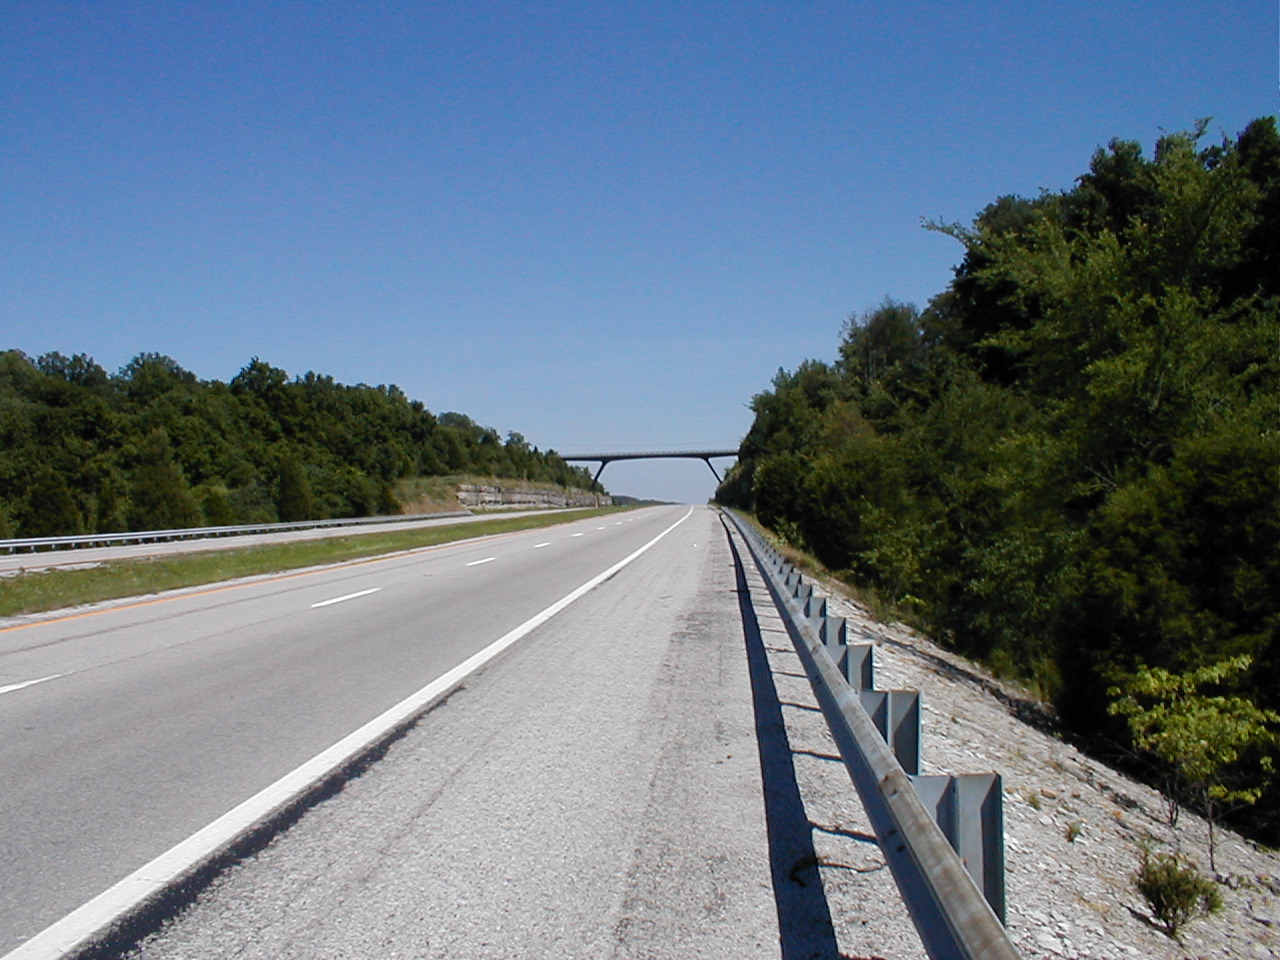 A view of the Glen Lily Road bridge from William H. Natcher parkway facing south.